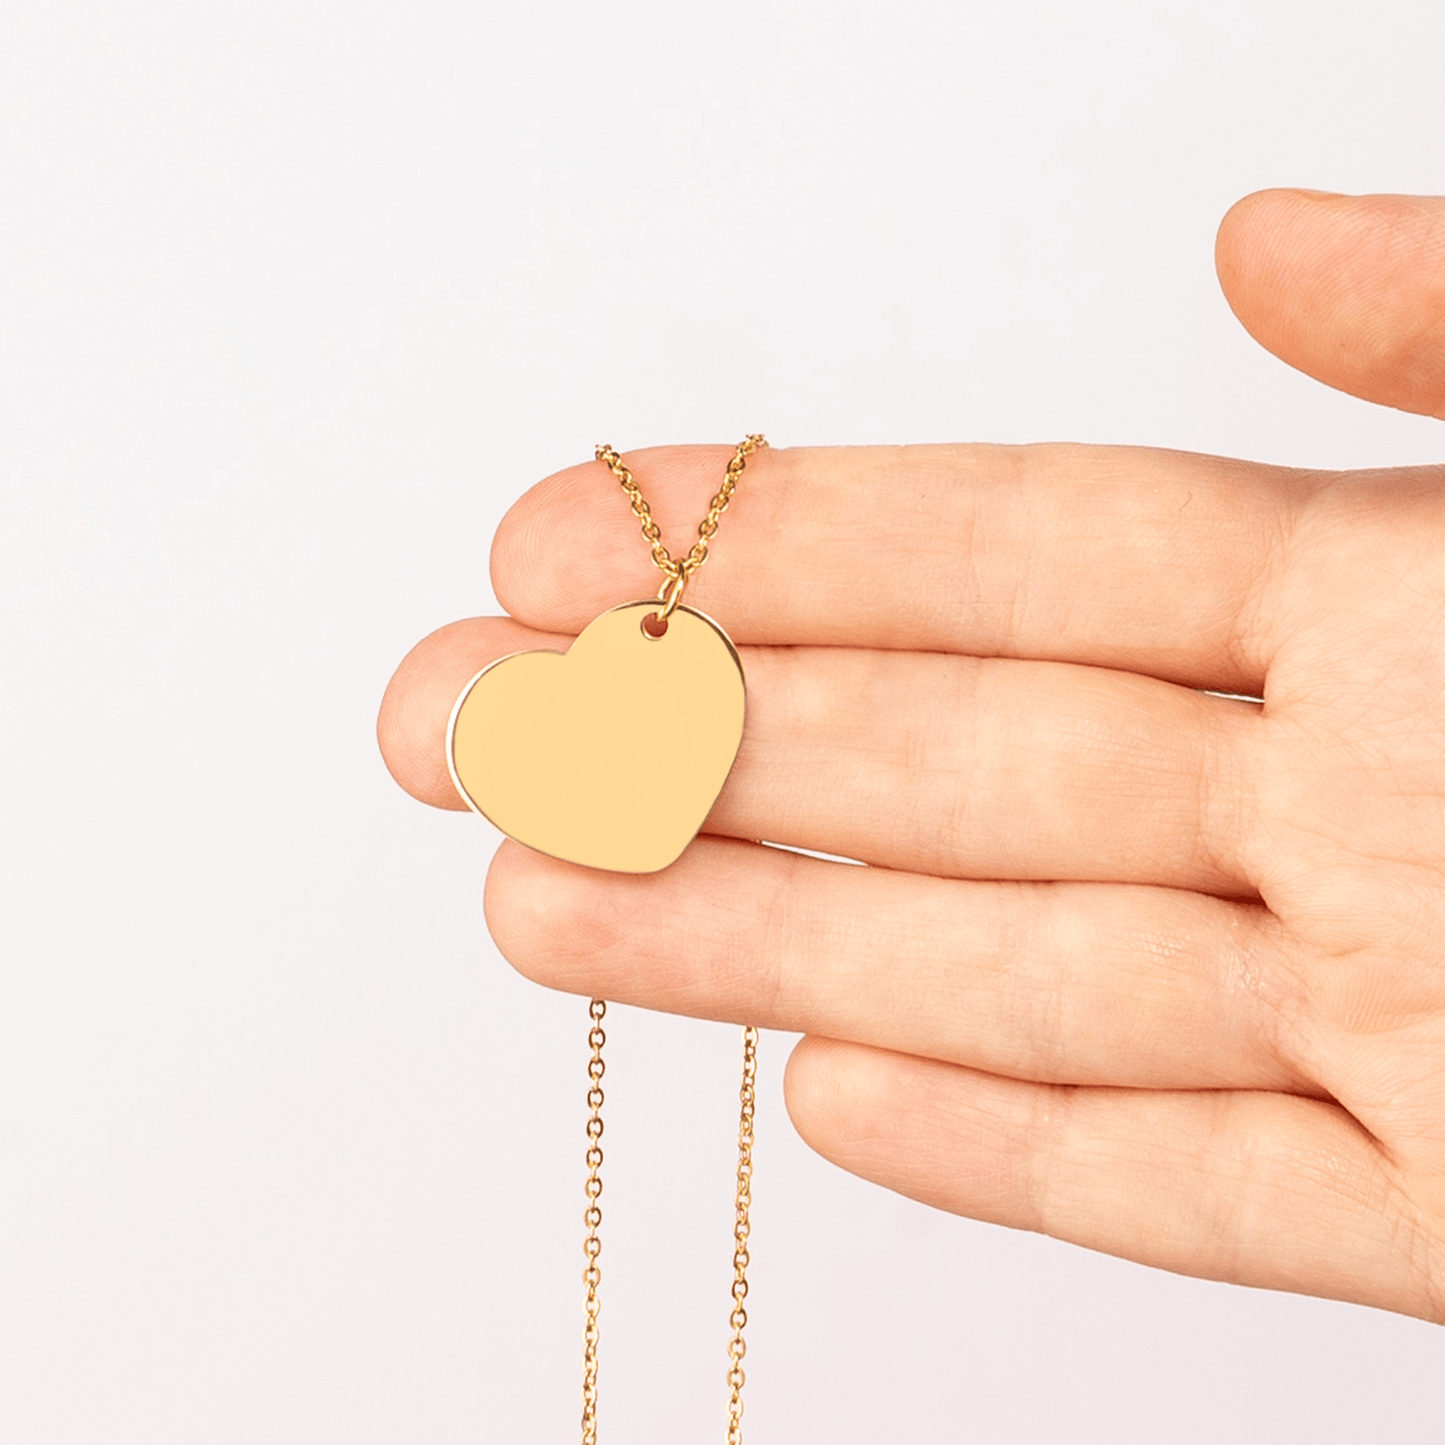 Sell your own design - Heart Necklace